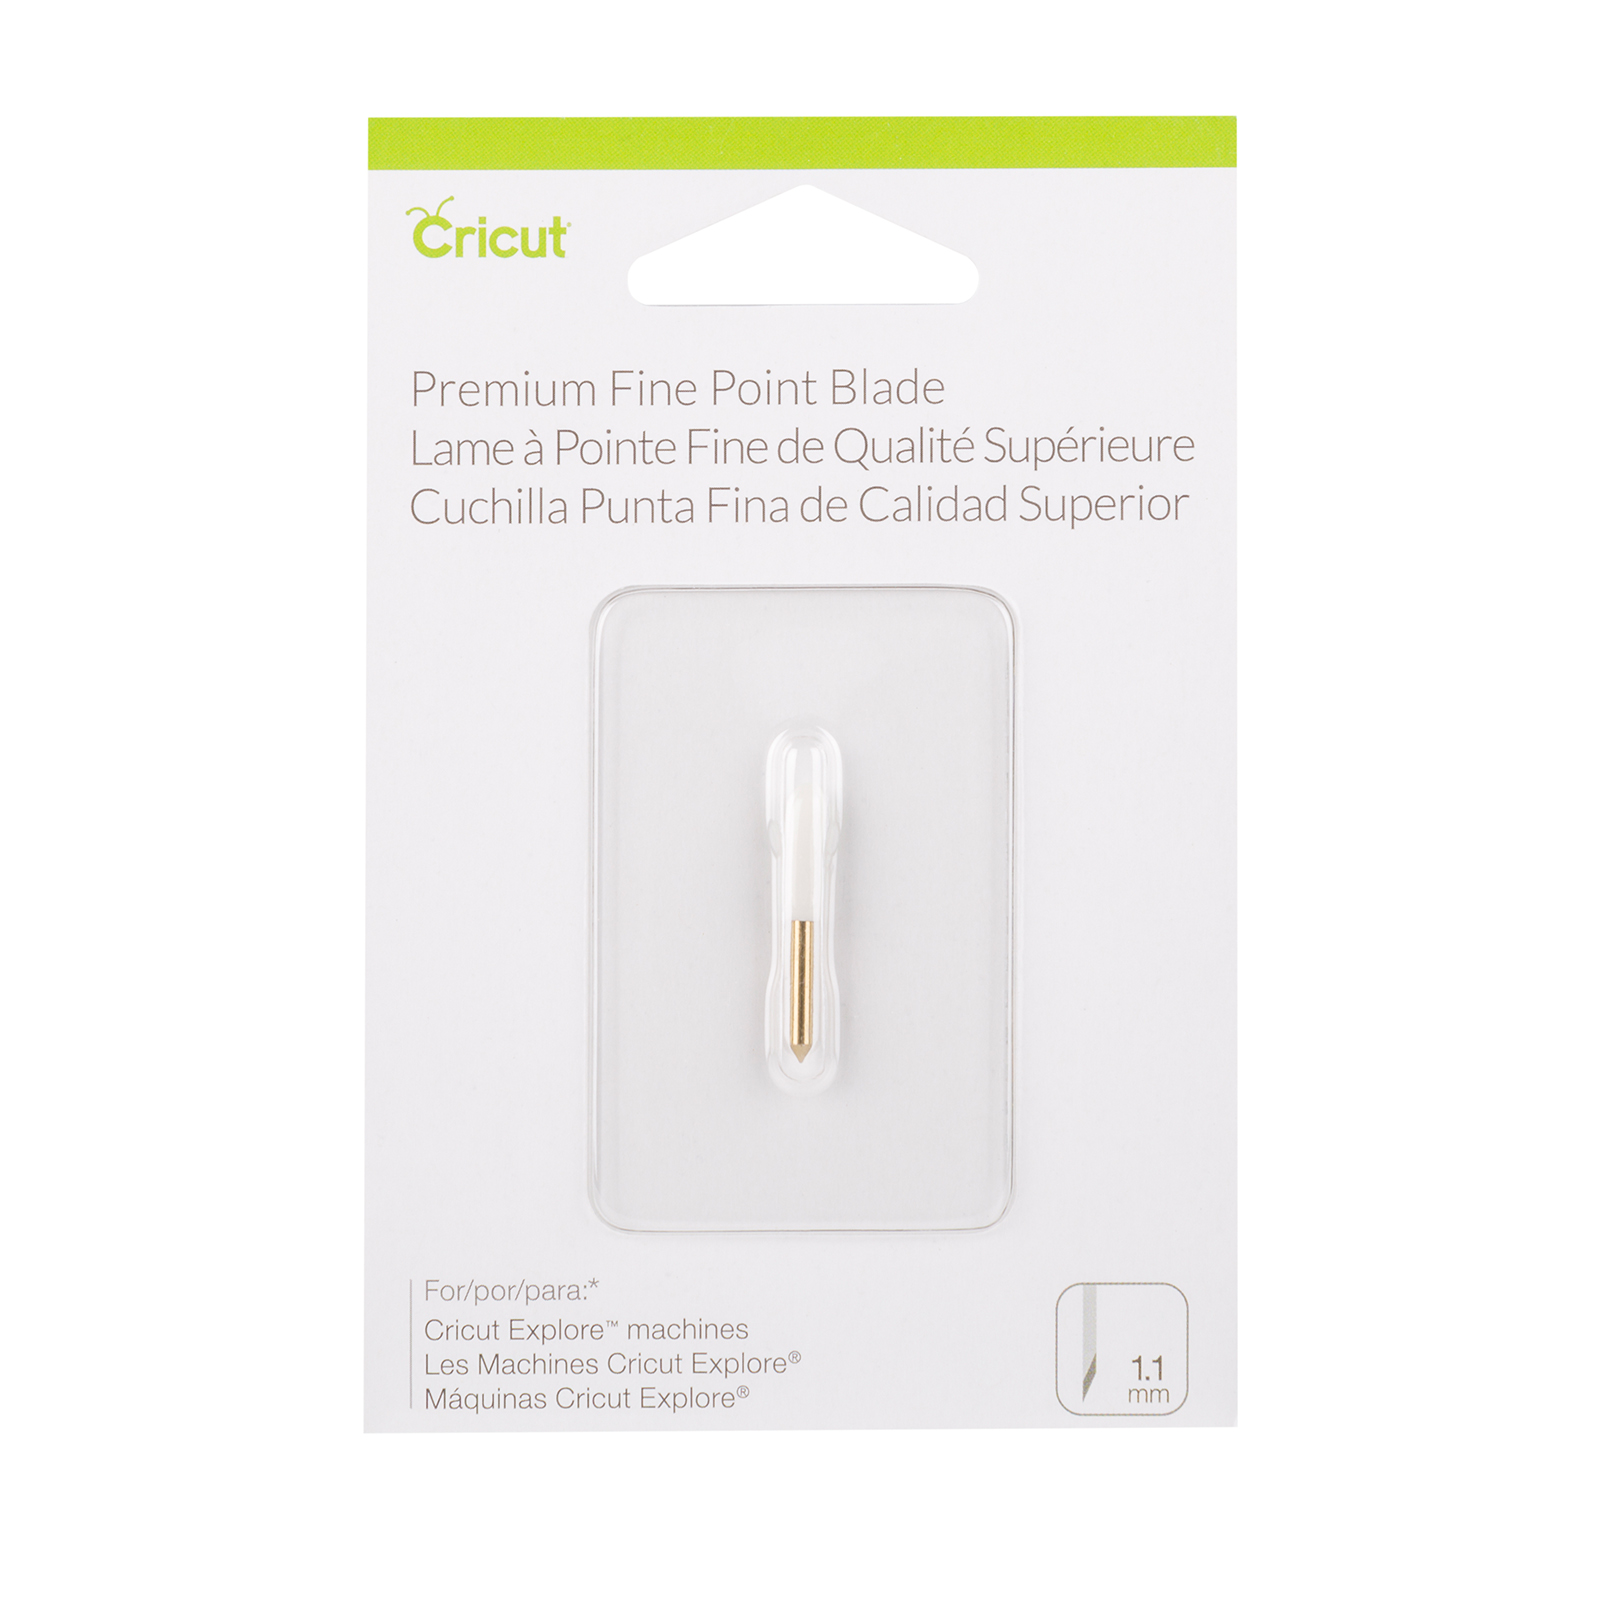 Premium Fine-Point replacement Blade Cricut for Maker and Explore